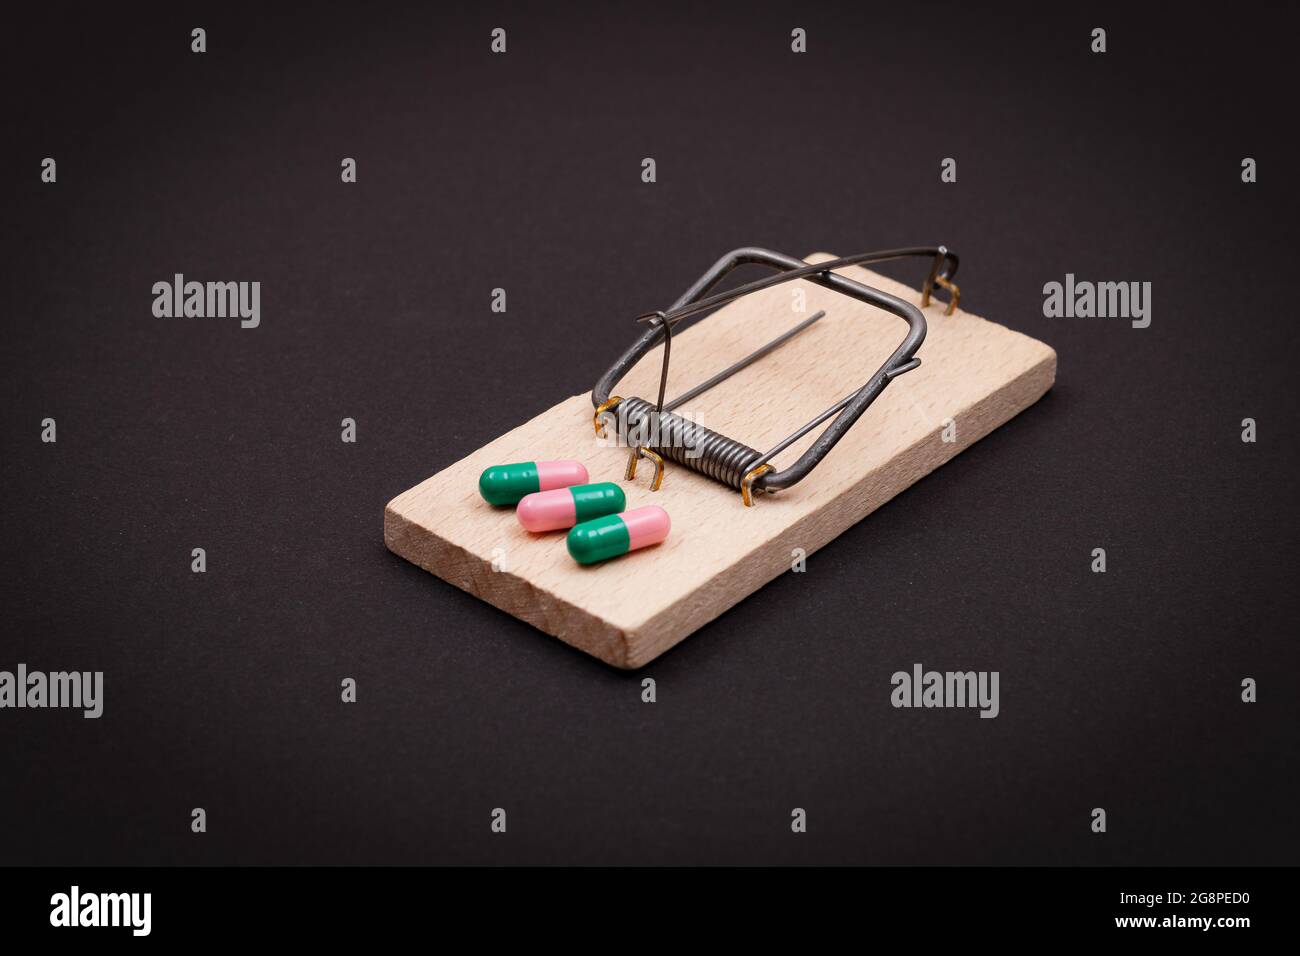 Pharmaceutical Addiction or Big Pharma Trap - Colored Pills or Capsules in Wooden Mousetrap on Black Background Stock Photo